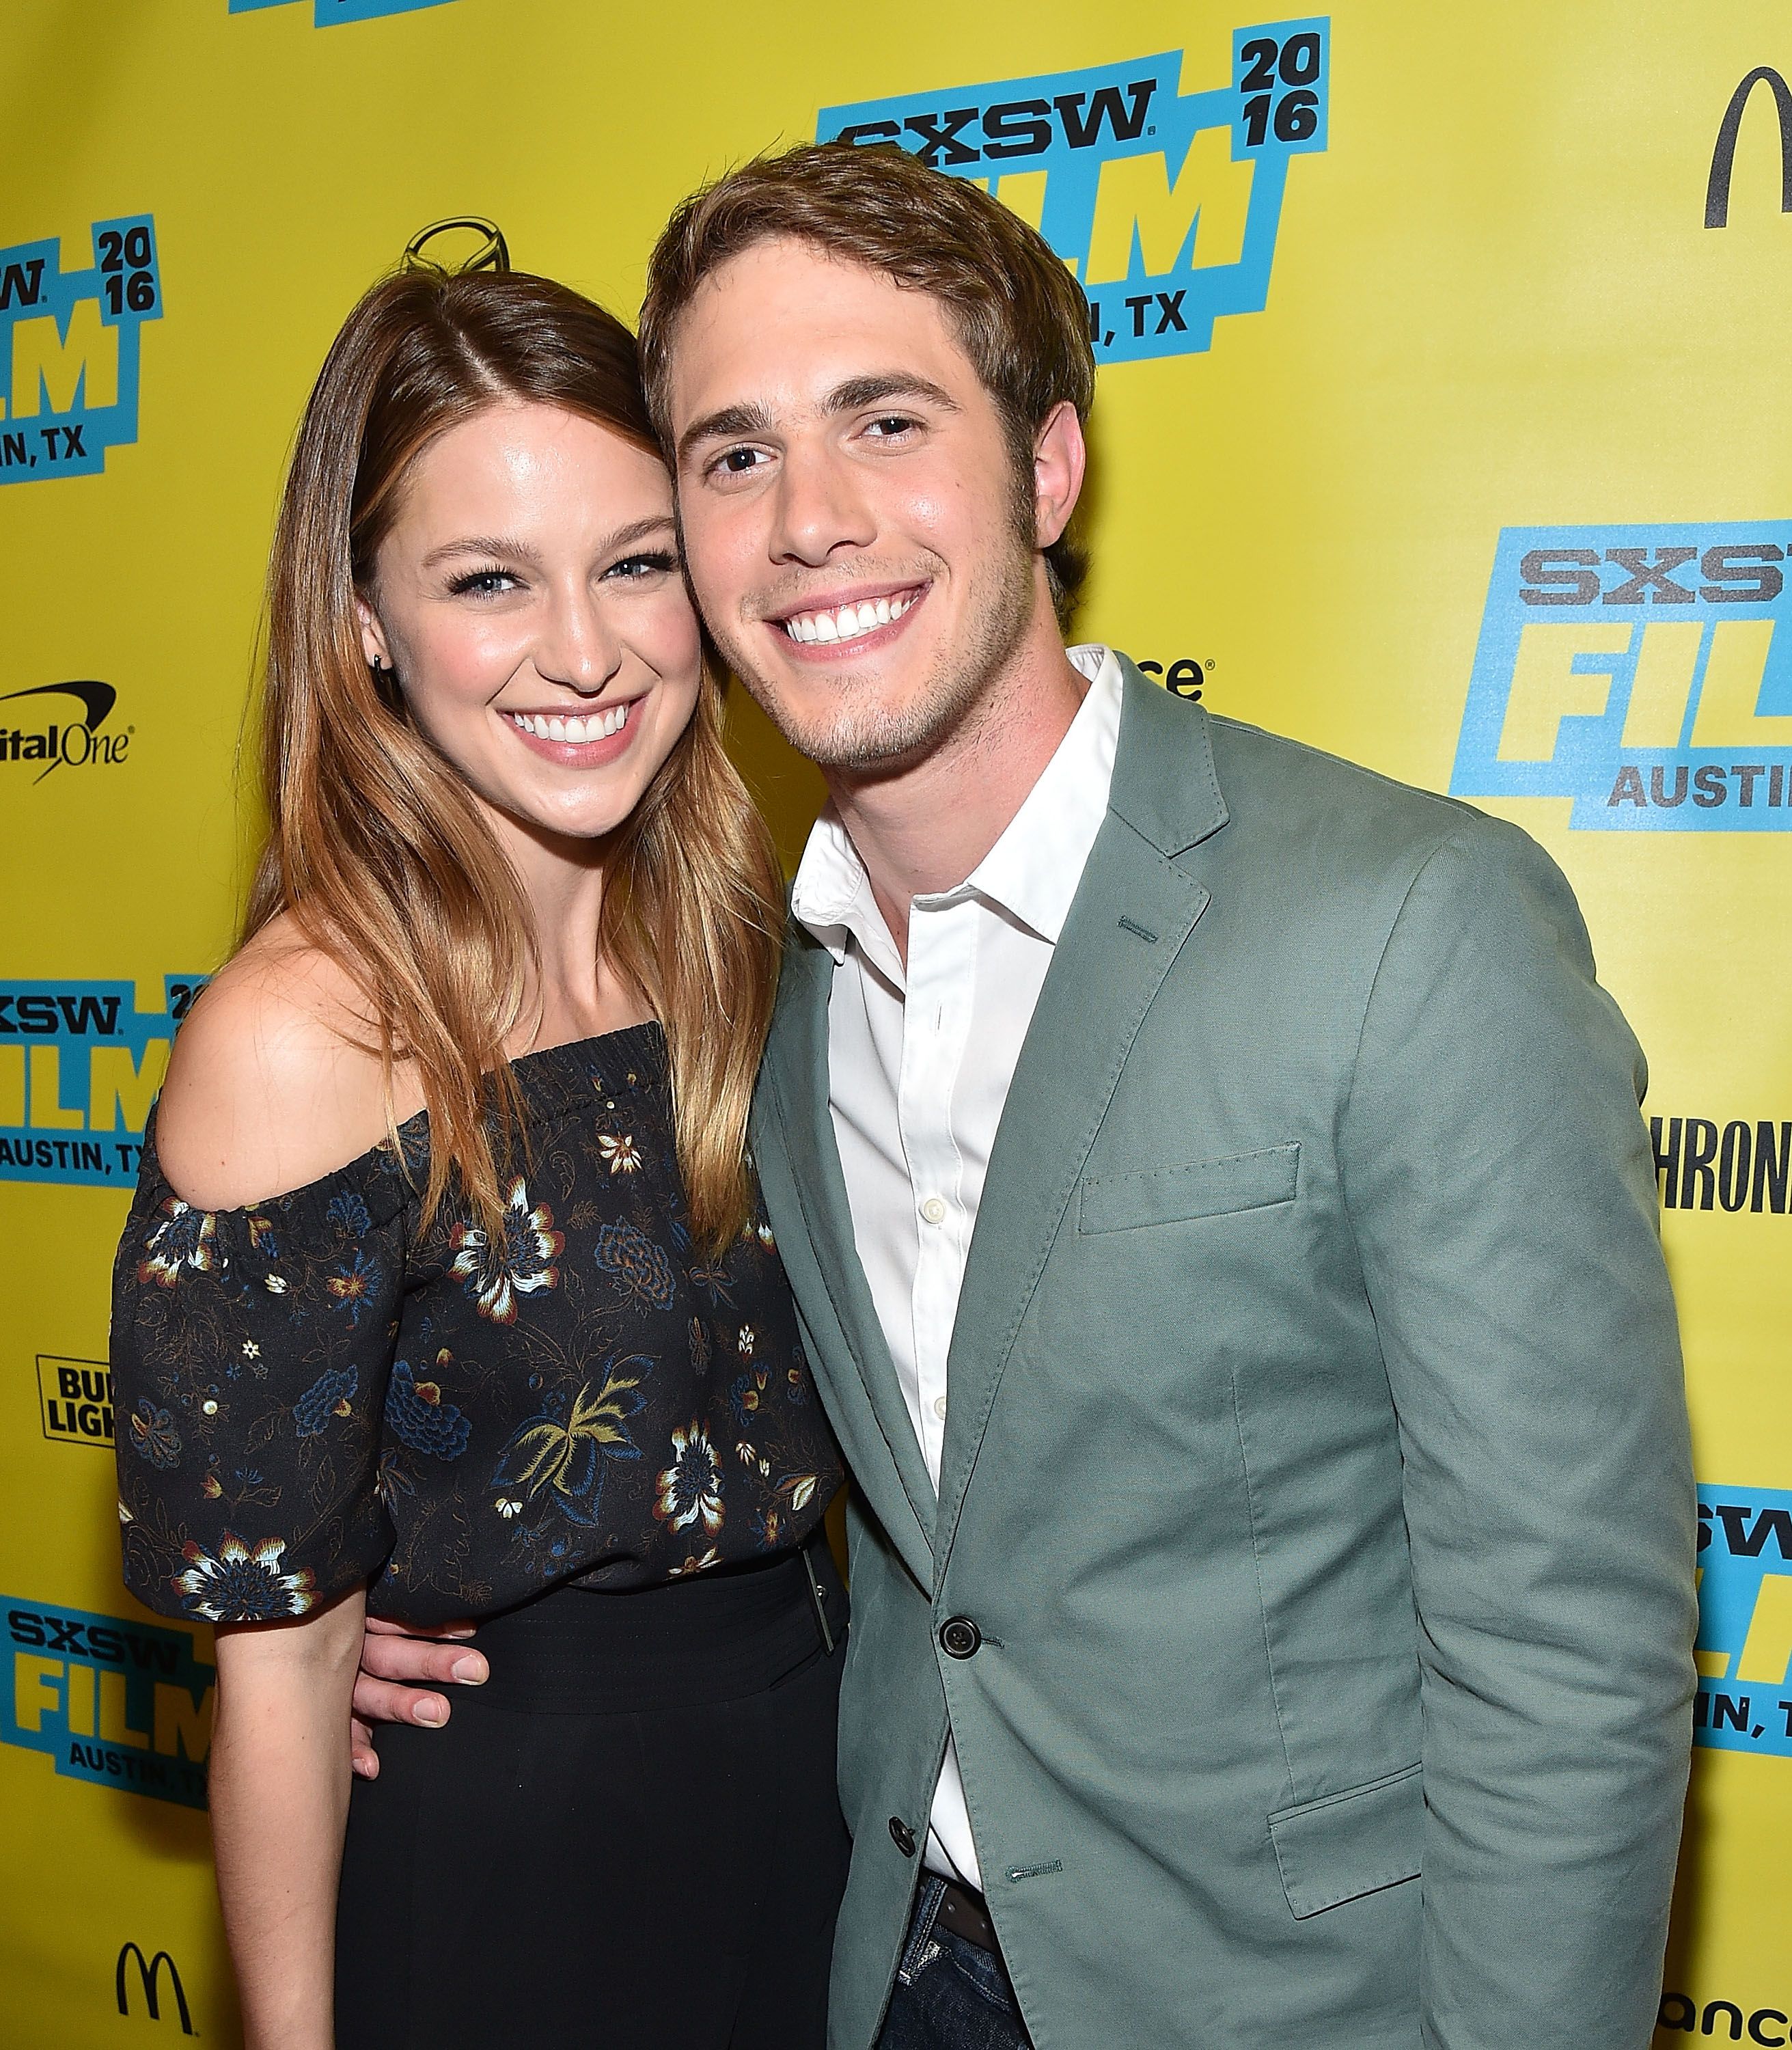 Melissa Benoist and Blake Jenner at the screening of "Everybody Wants Some" in 2016 in Austin, Texas | Source: Getty Images 